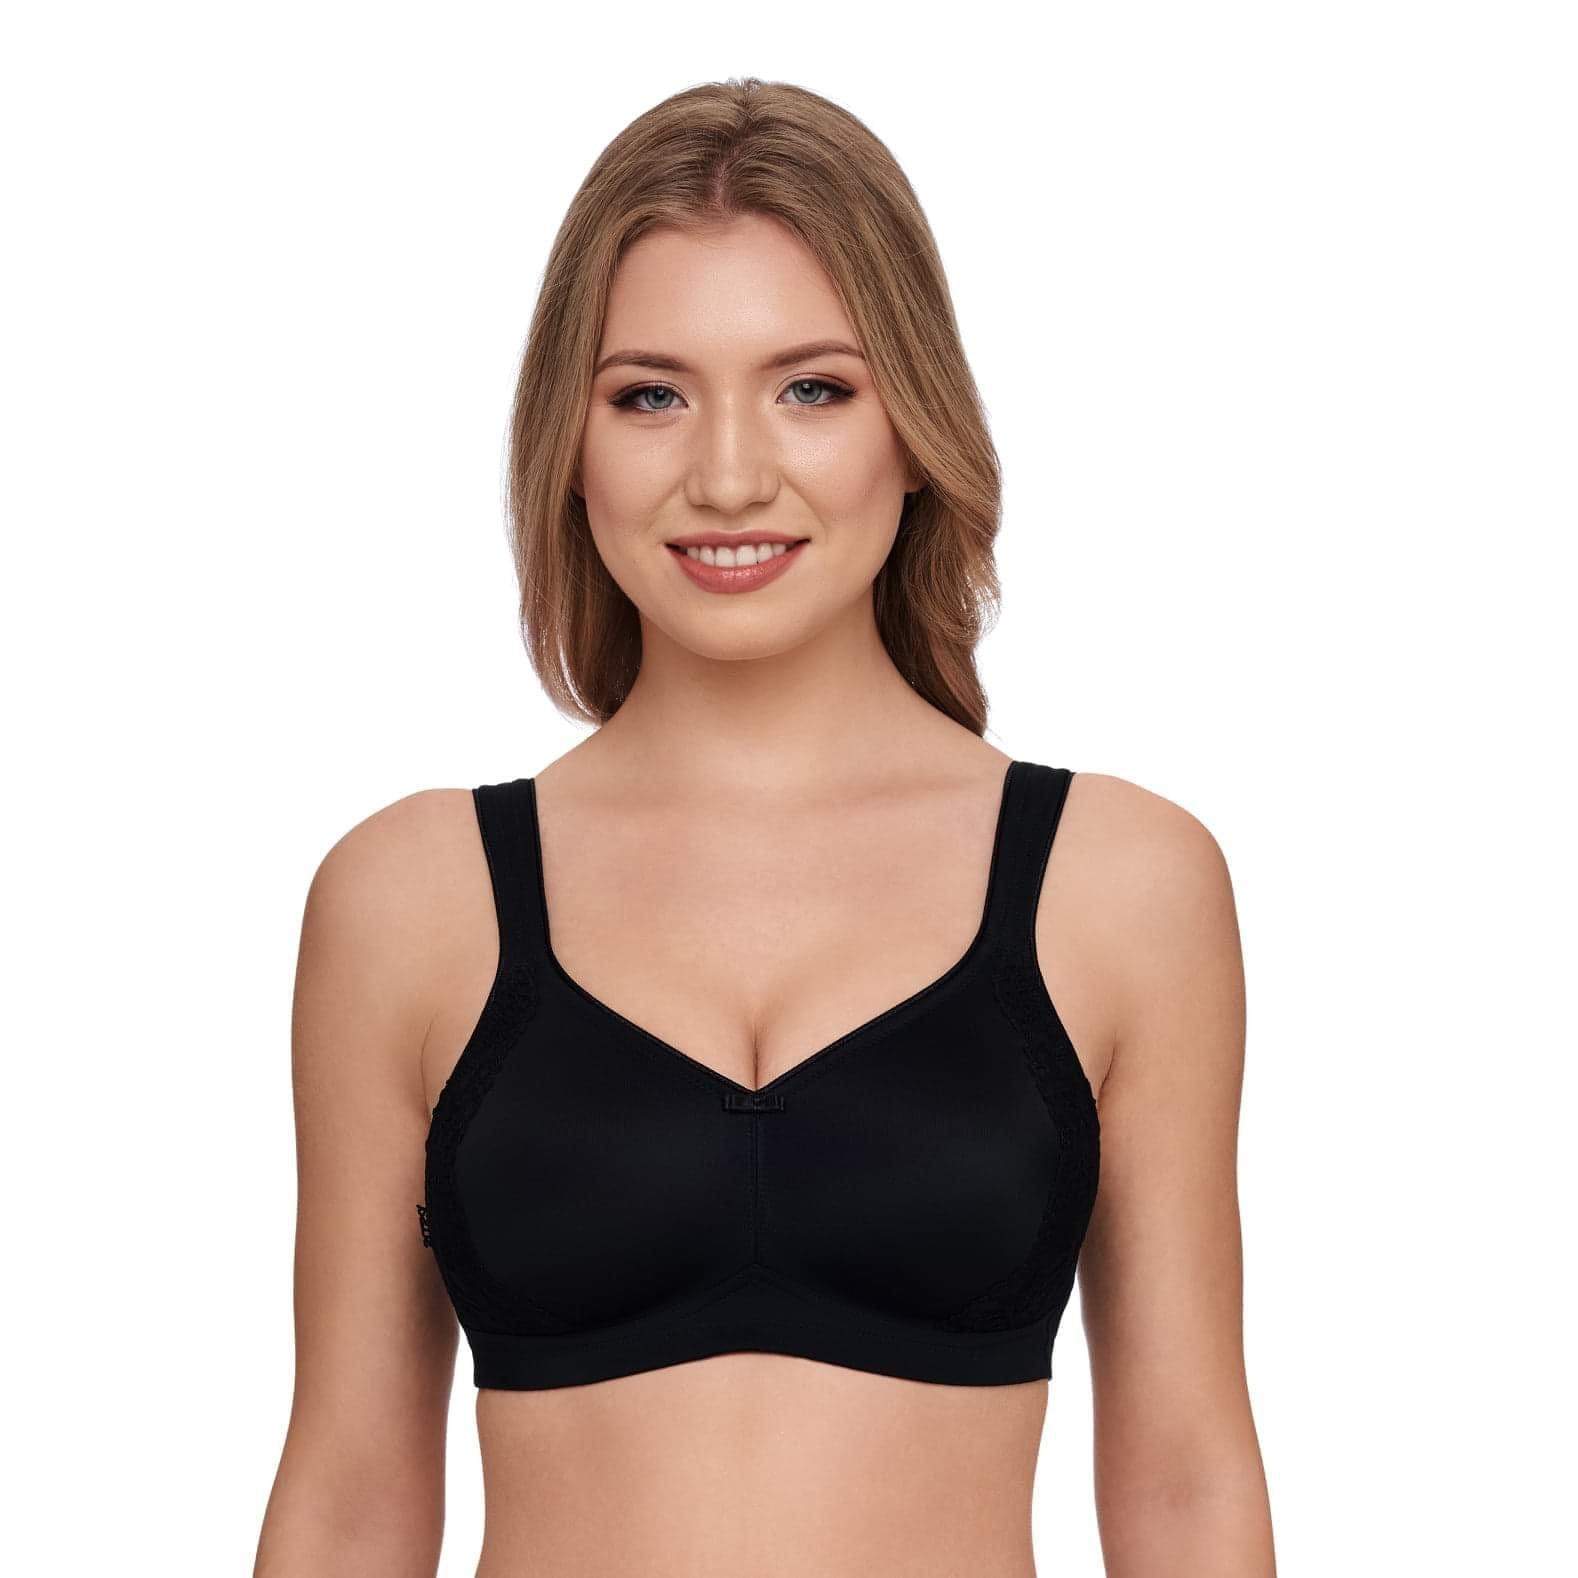 Susa London 8041 - Wirefree Bra Black / 18C  Available at Illusions Lingerie